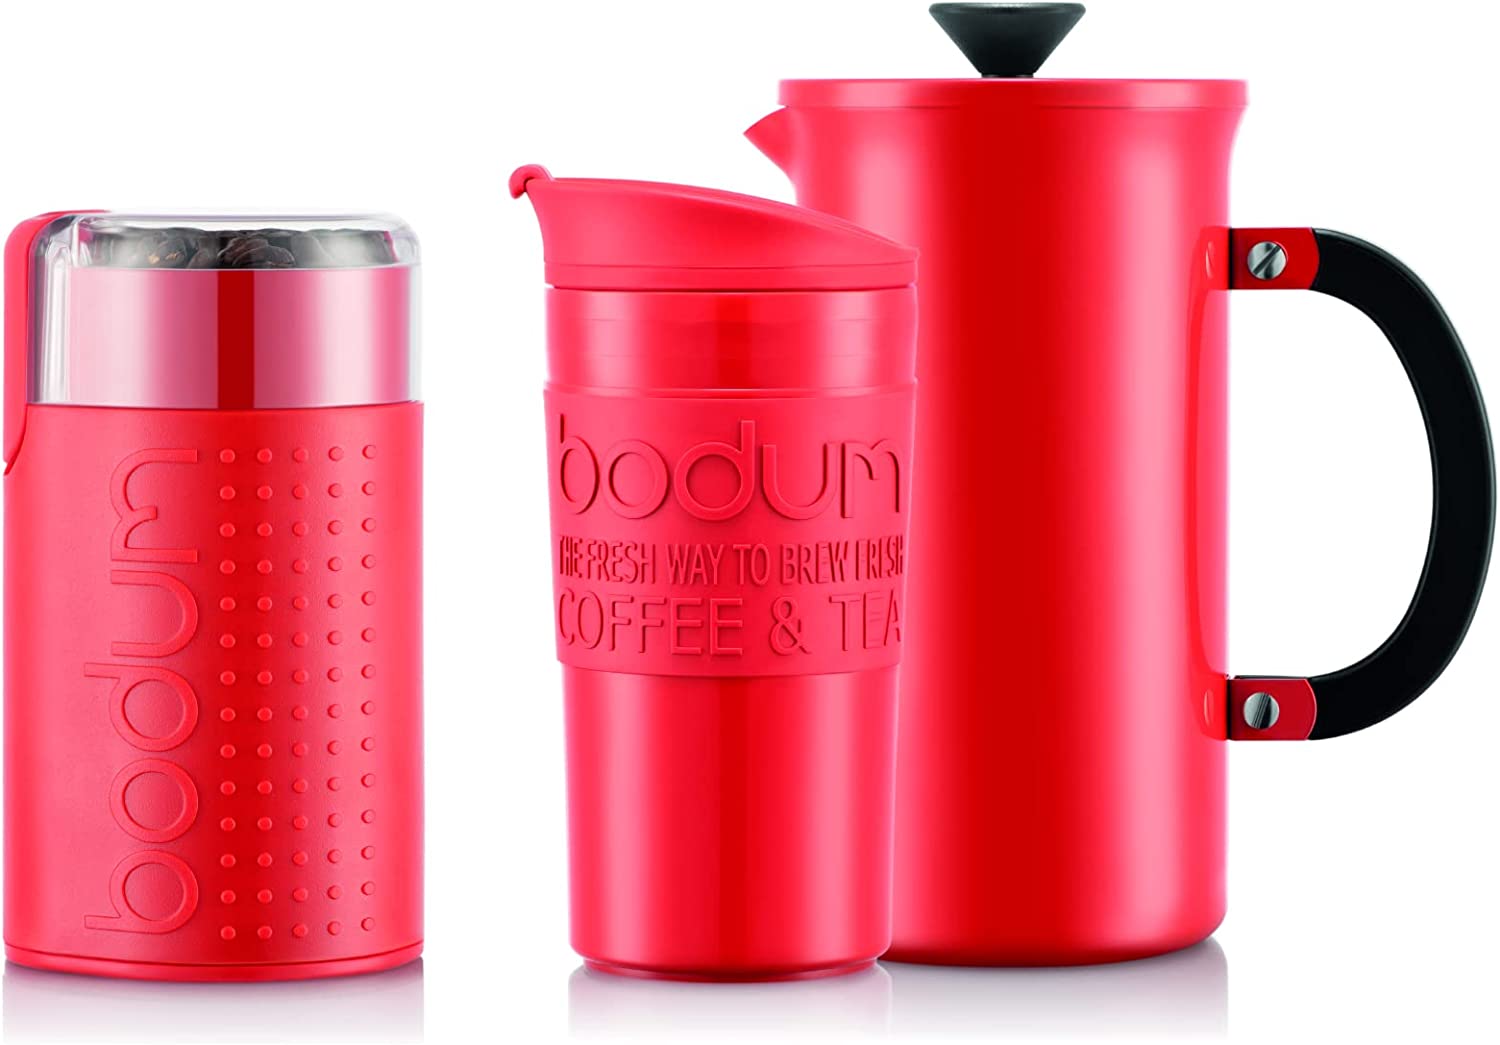 Bodum TRIBUTE SET K11352-04EURO Cafetiere Coffee Maker 8 Cups / 1.0 Litres Travel Mug and Coffee Grinder